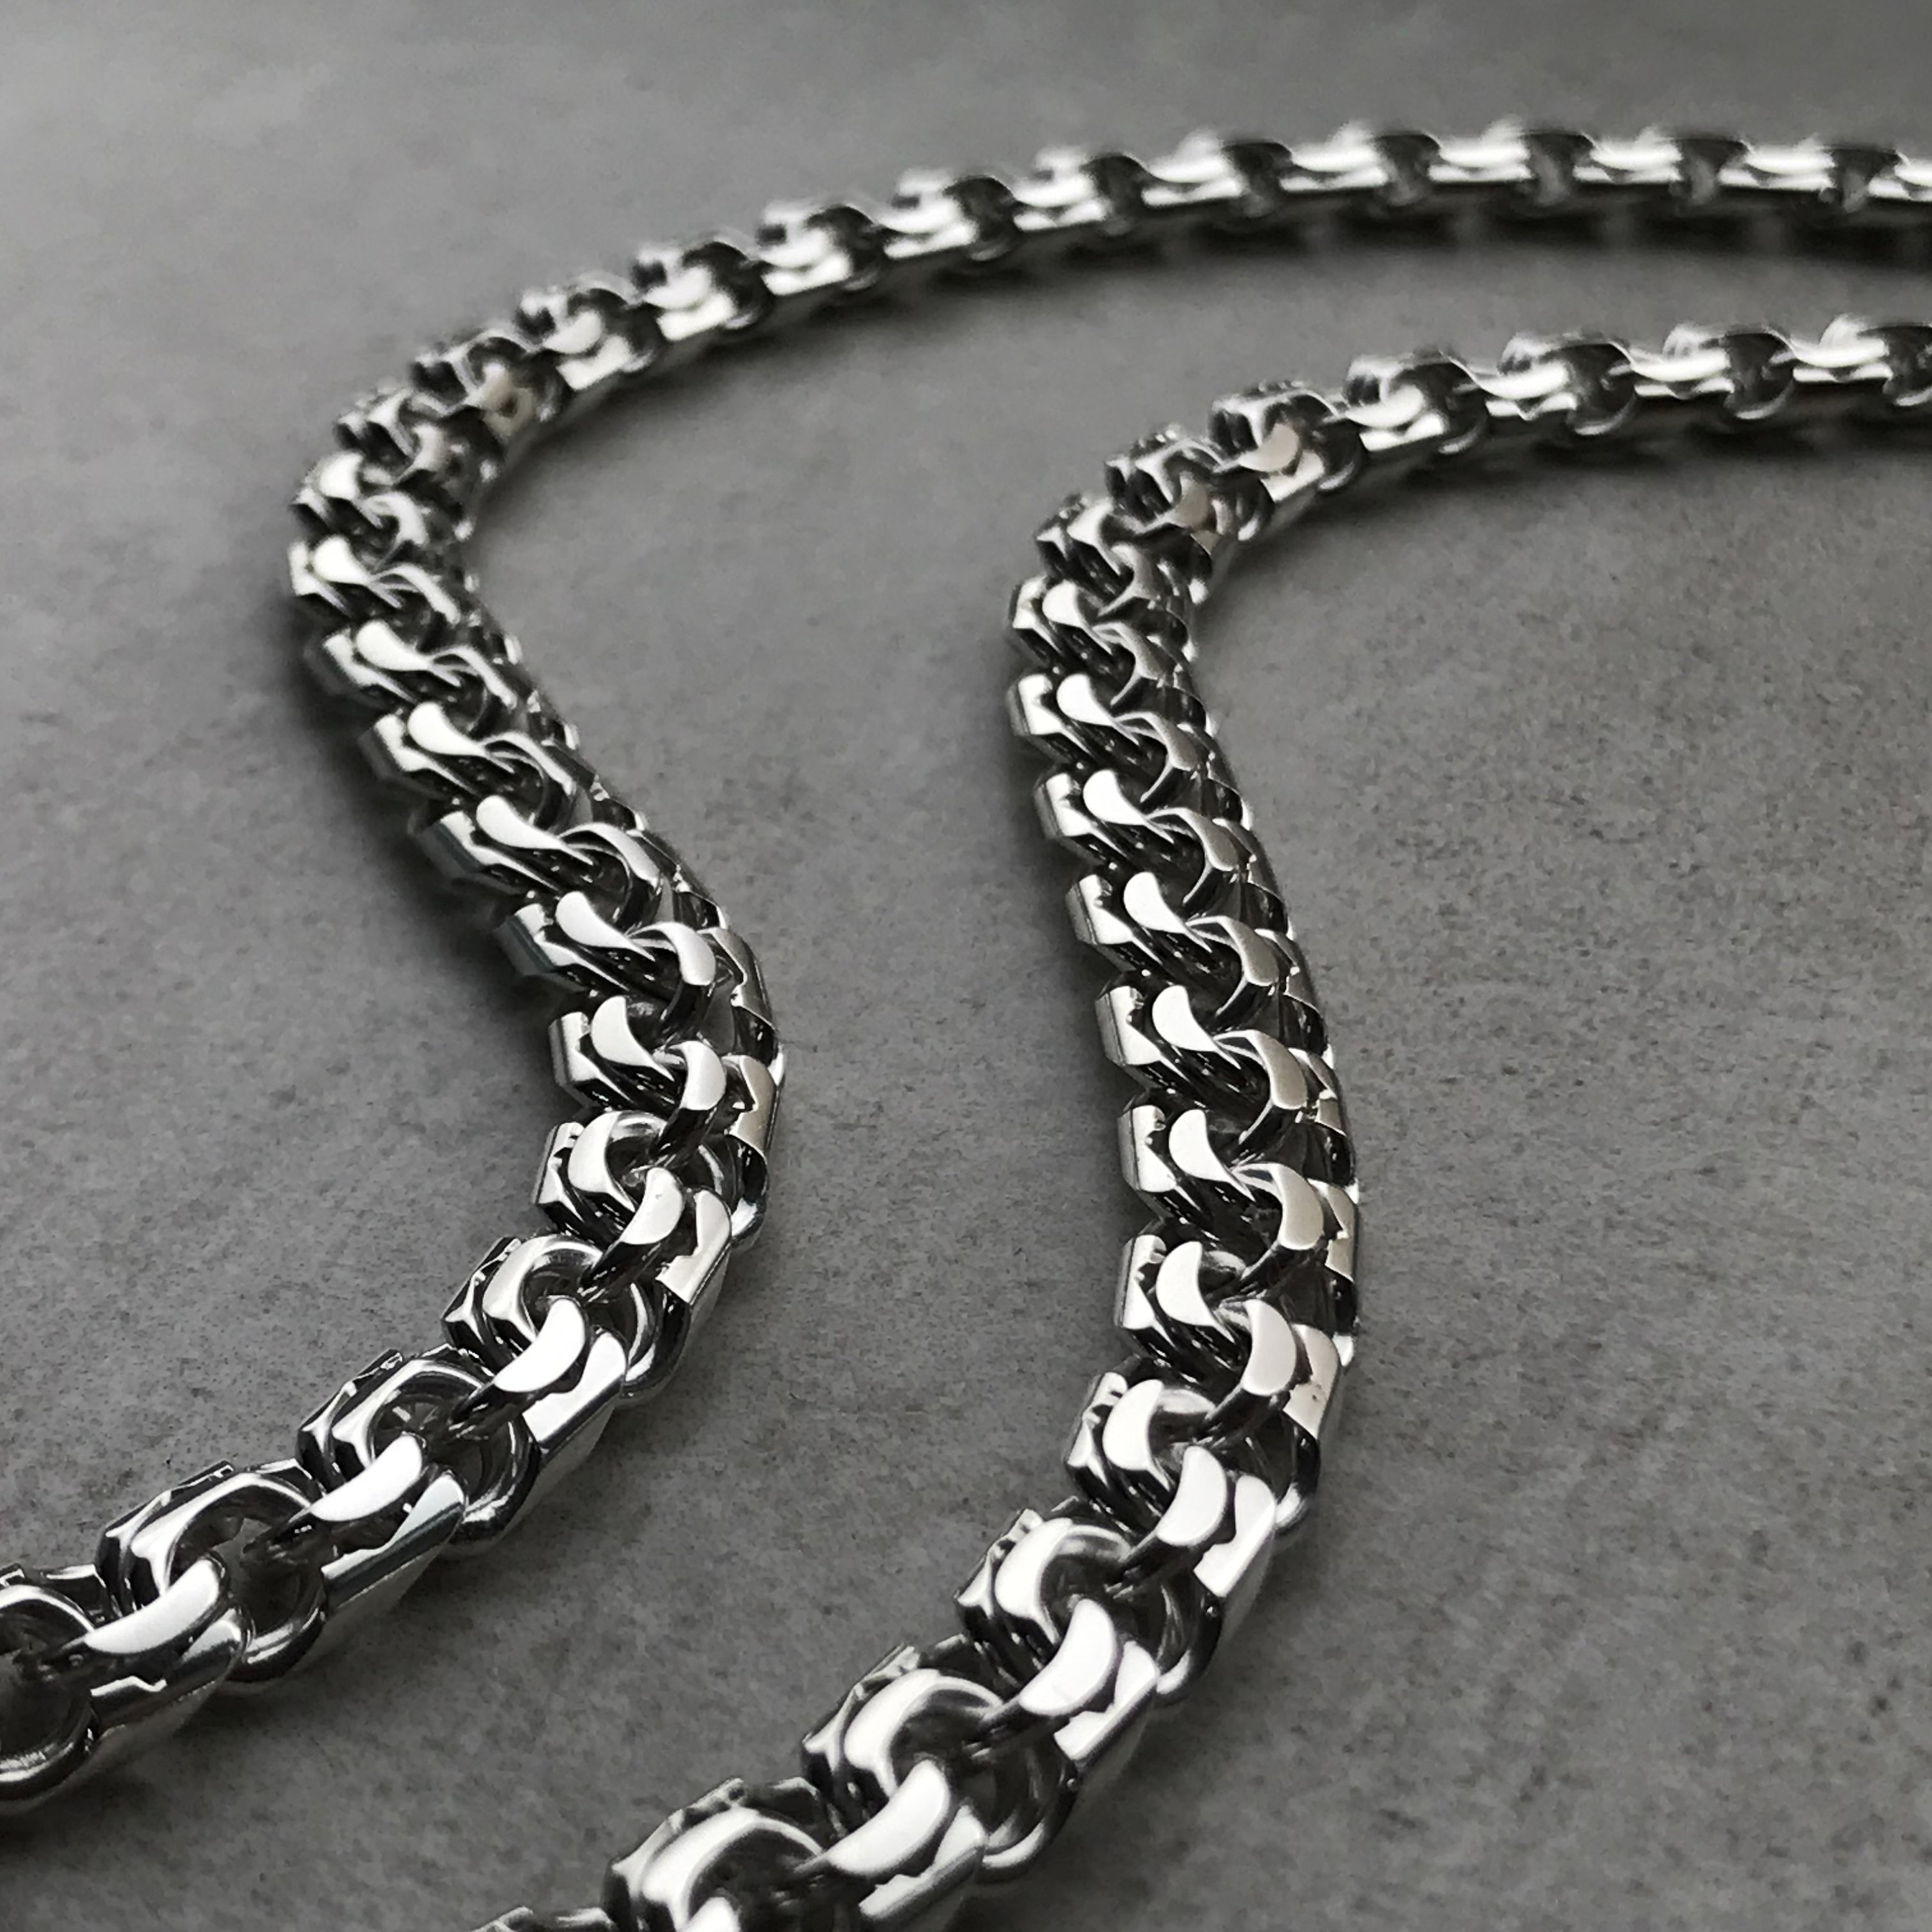 Mens Silver Necklace High Quality Stainless Steel Necklace Chain for Men  Birthday Present for Him silver, Plain Coil Necklace 